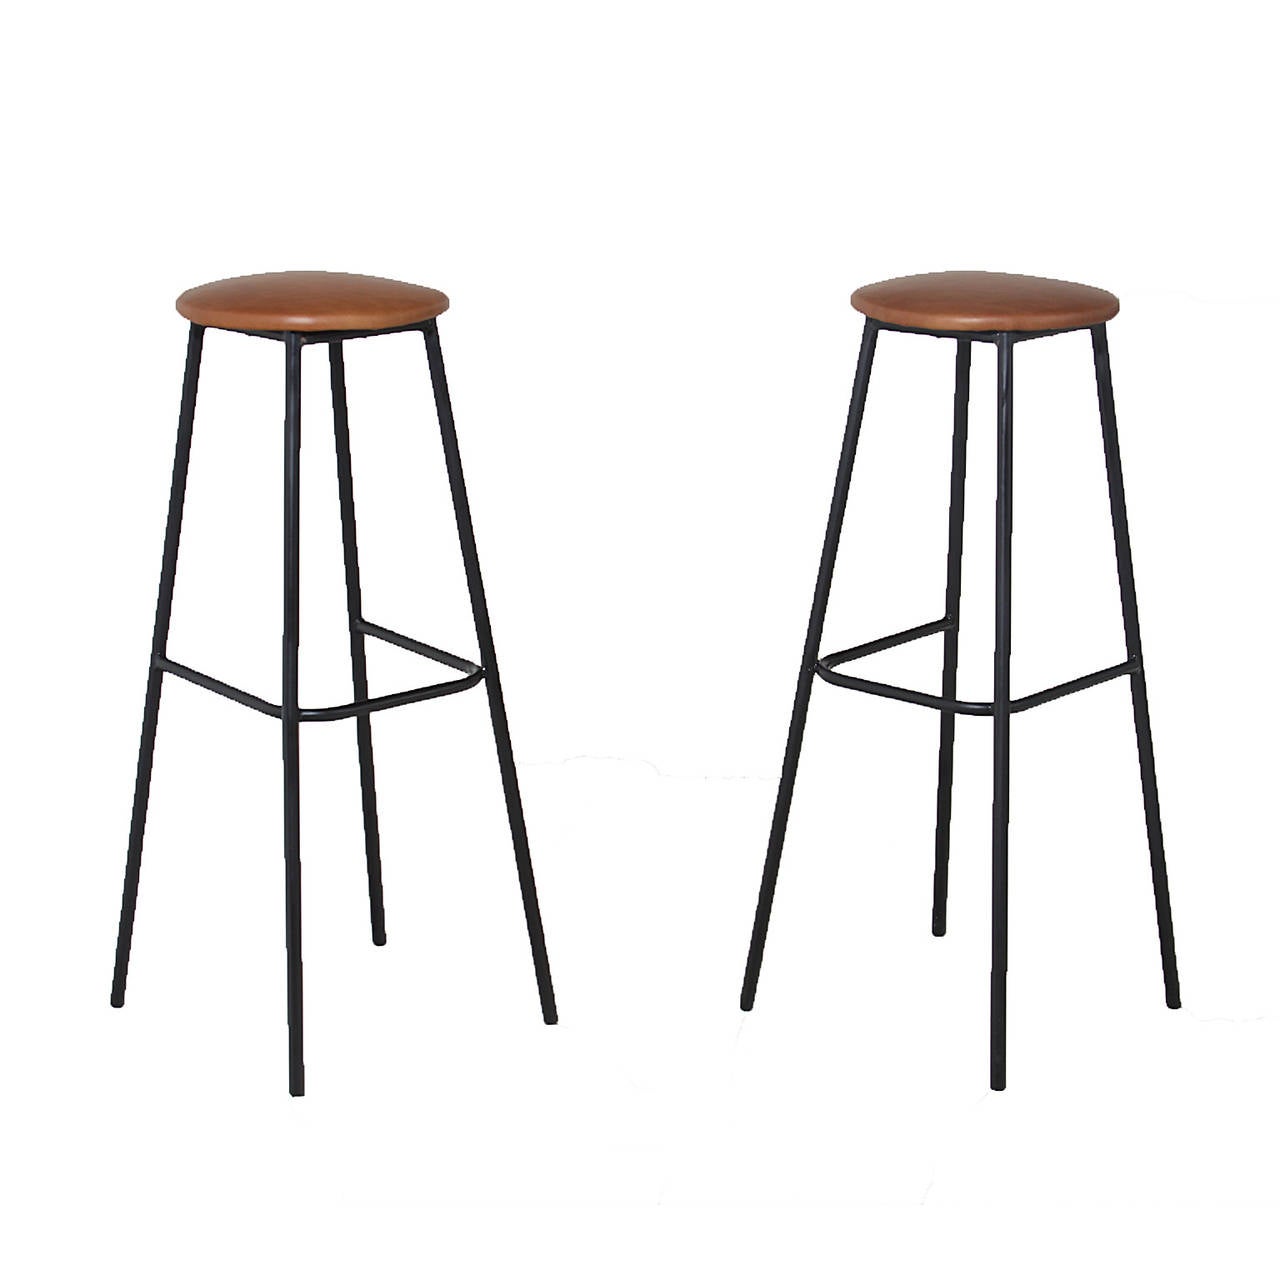 Mid-Century Modern Midcentury Iron and Leather Stools with Straight and Splayed Legs For Sale